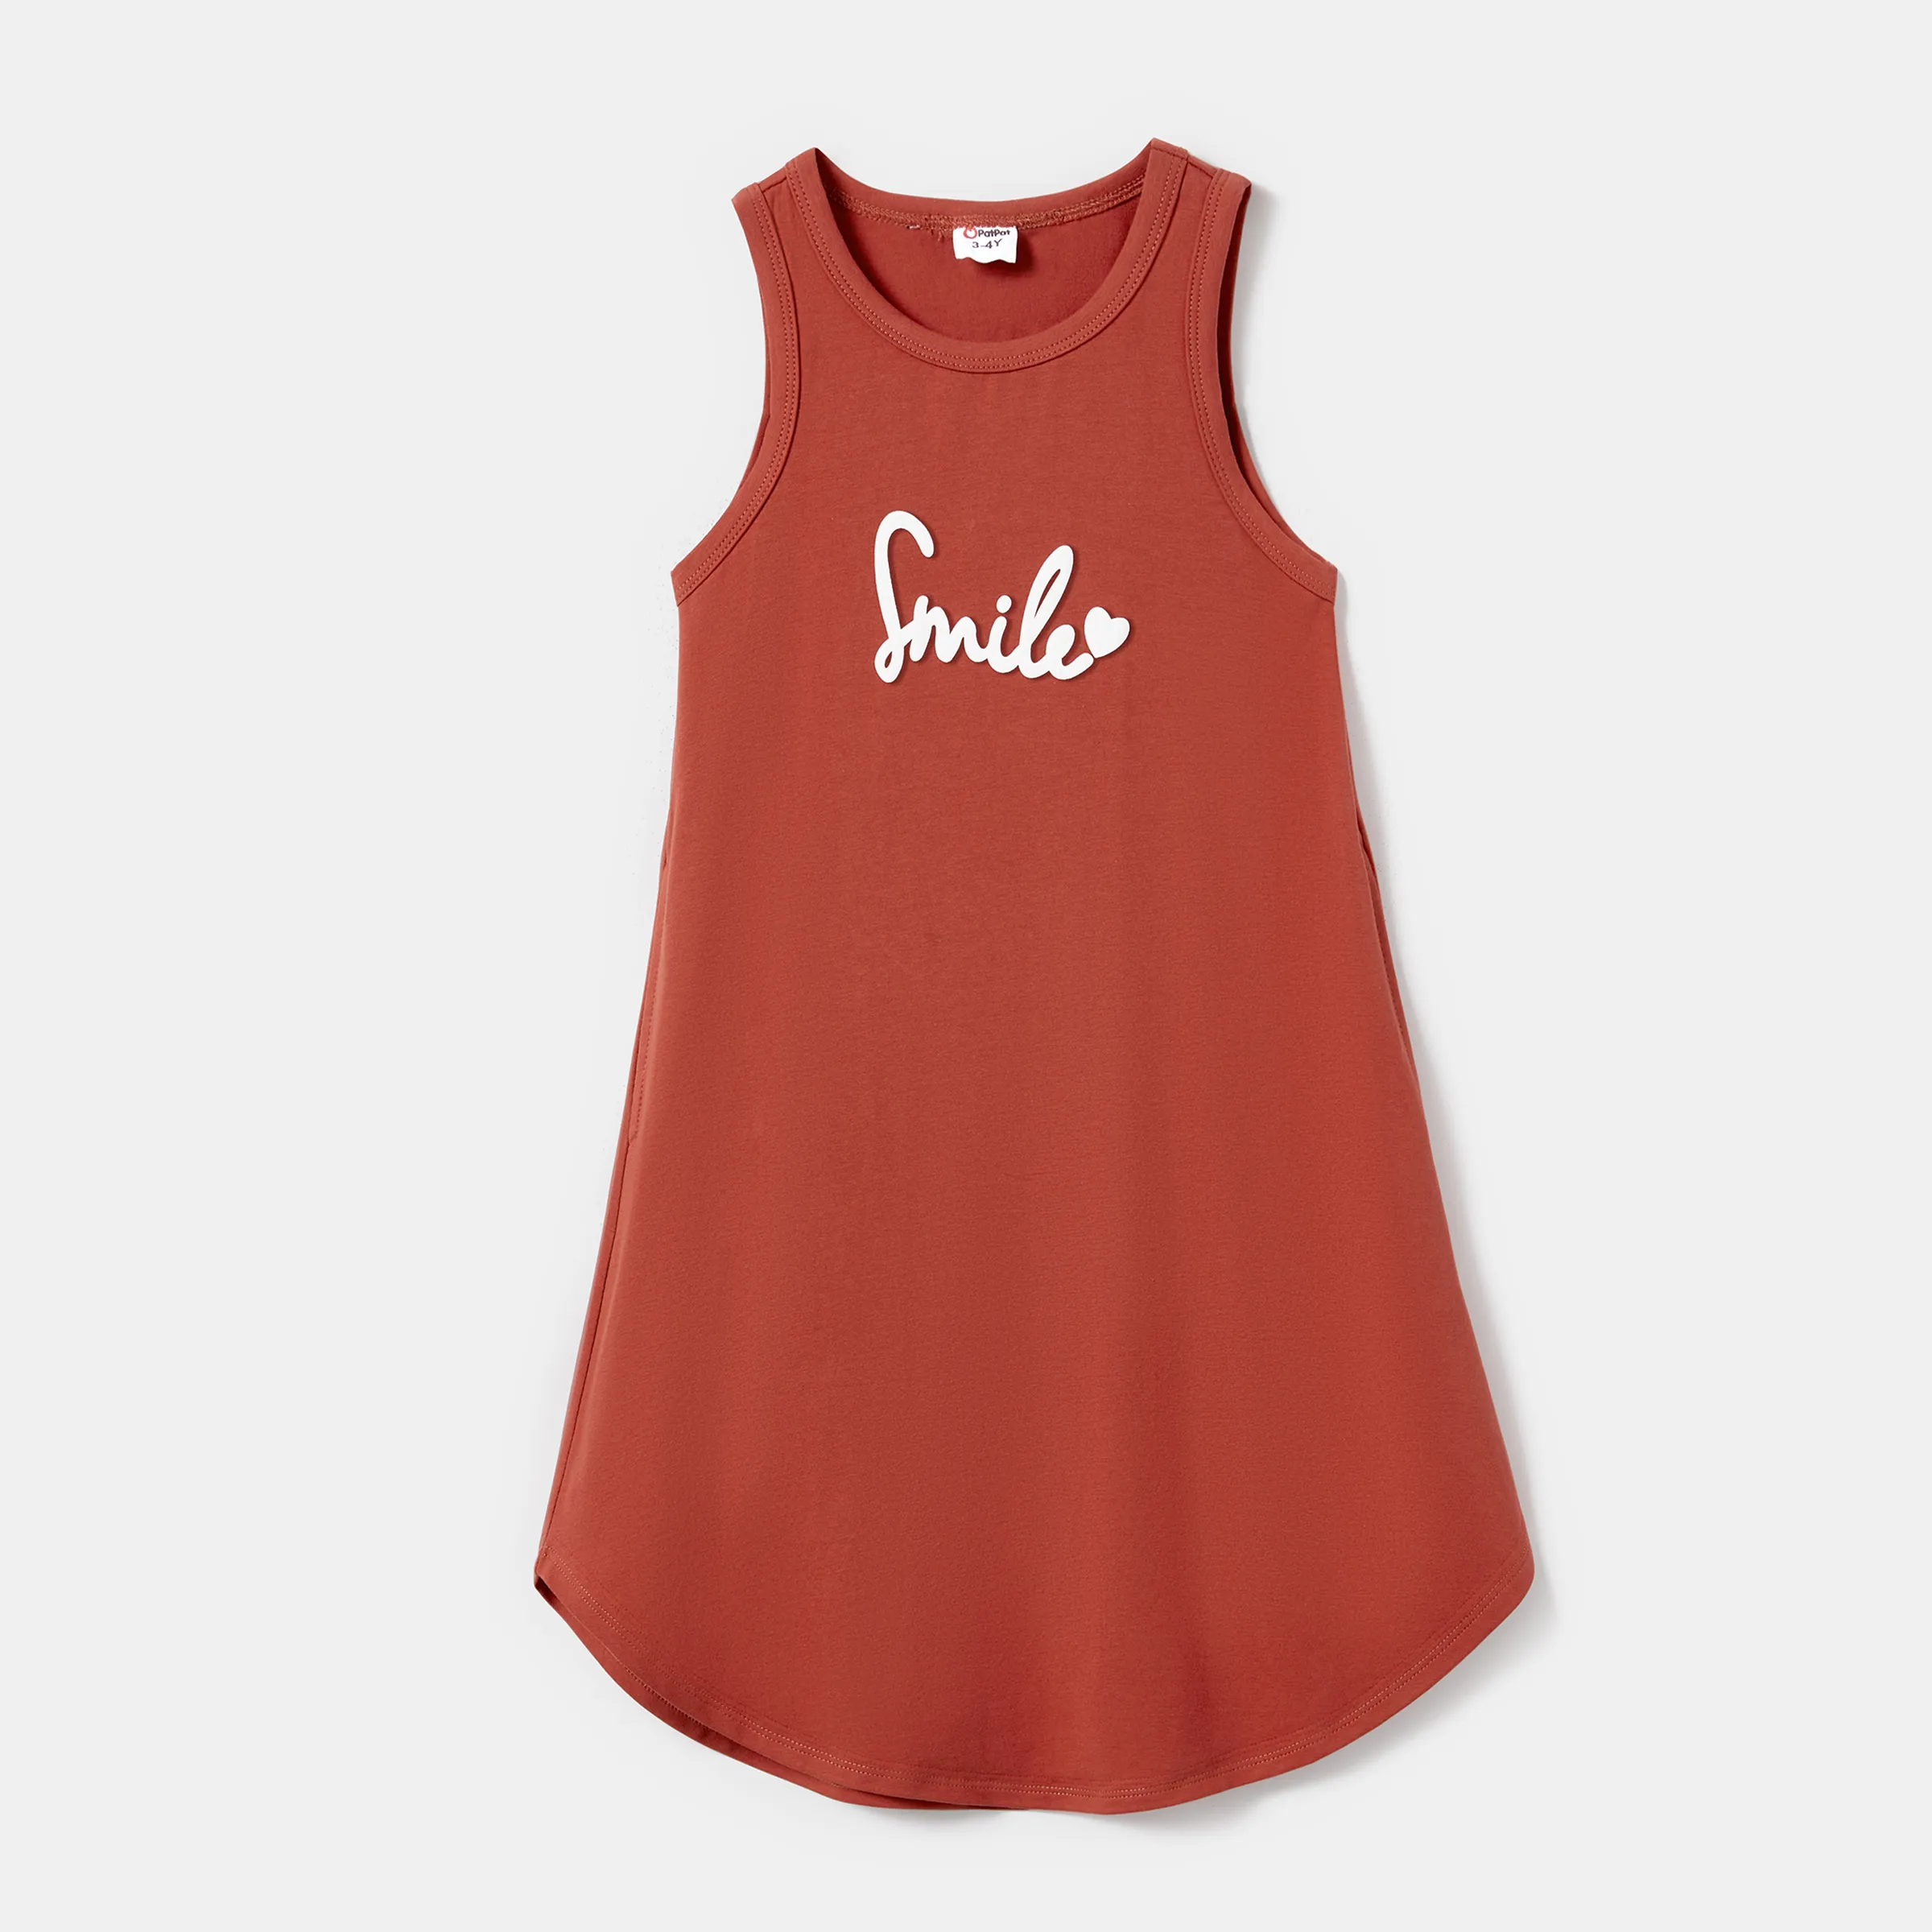 Mommy And Me Letter Print Rust Red Tank Cotton Dress